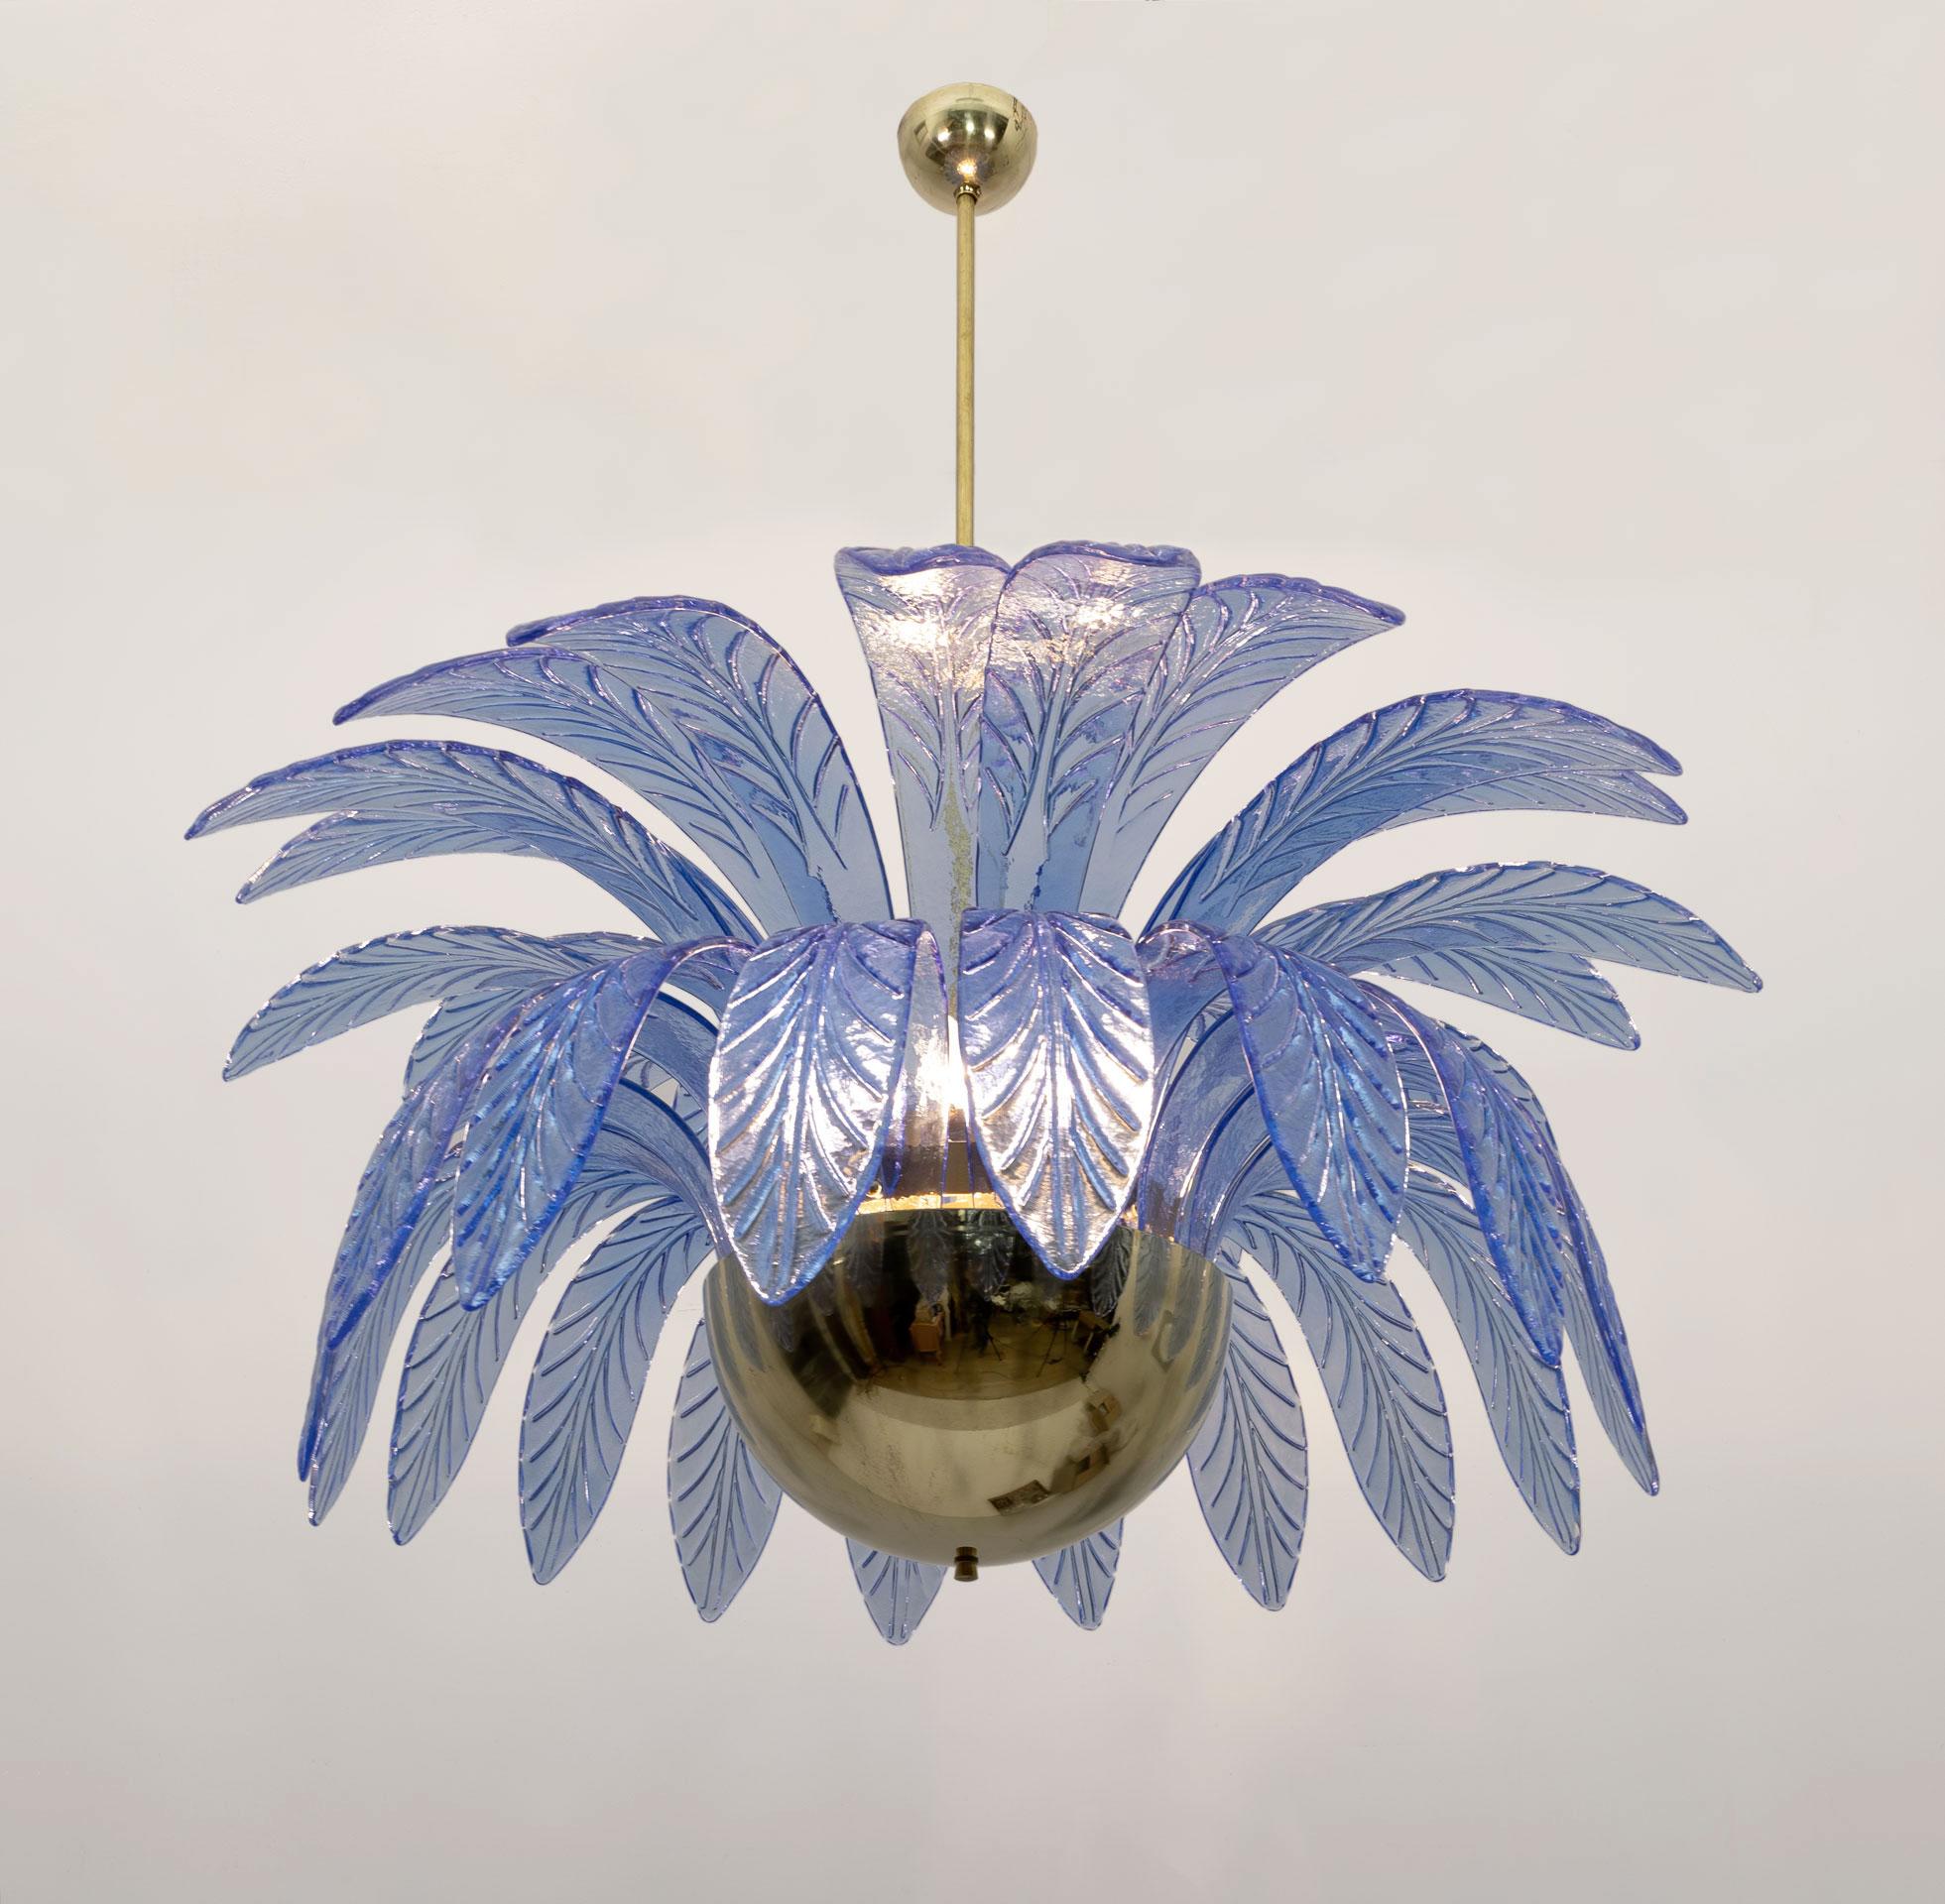 Italian Mid-Century Modern Palm Leaves Big Chandelier Murano Glass and Brass, 1970s For Sale